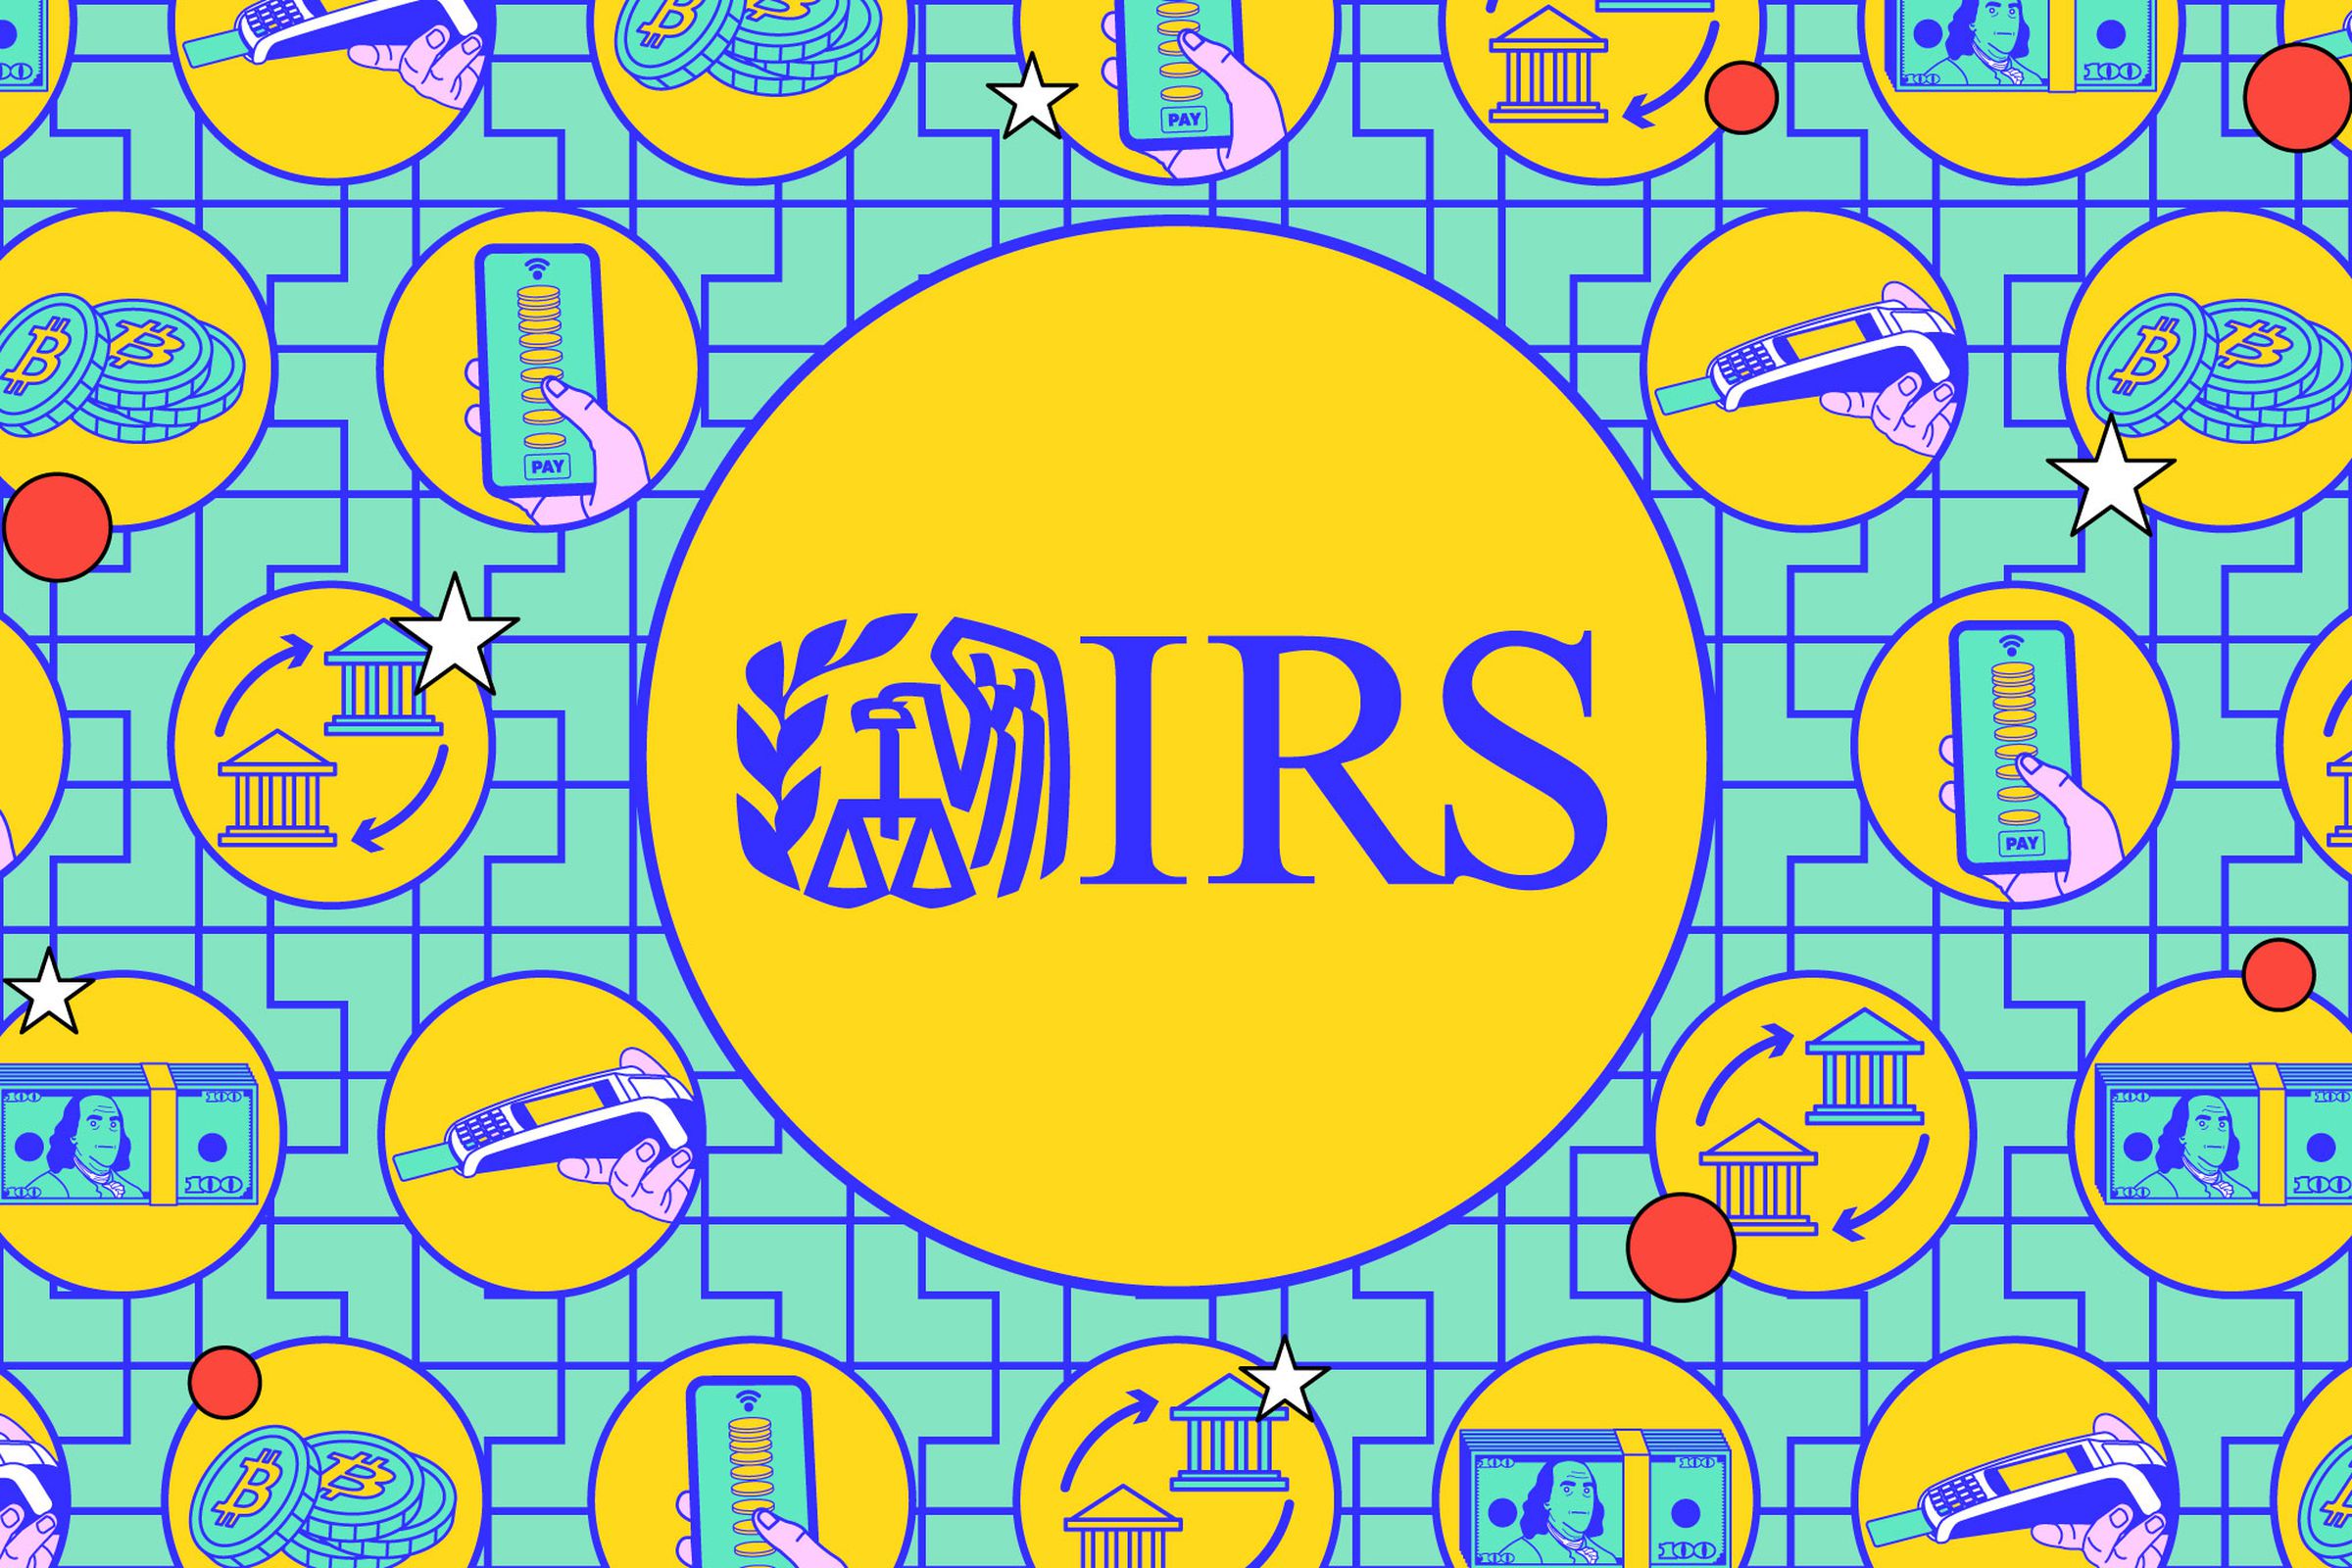 Colorful image of the IRS logo with several small images surrounded by smartphones and financial-themed drawings.